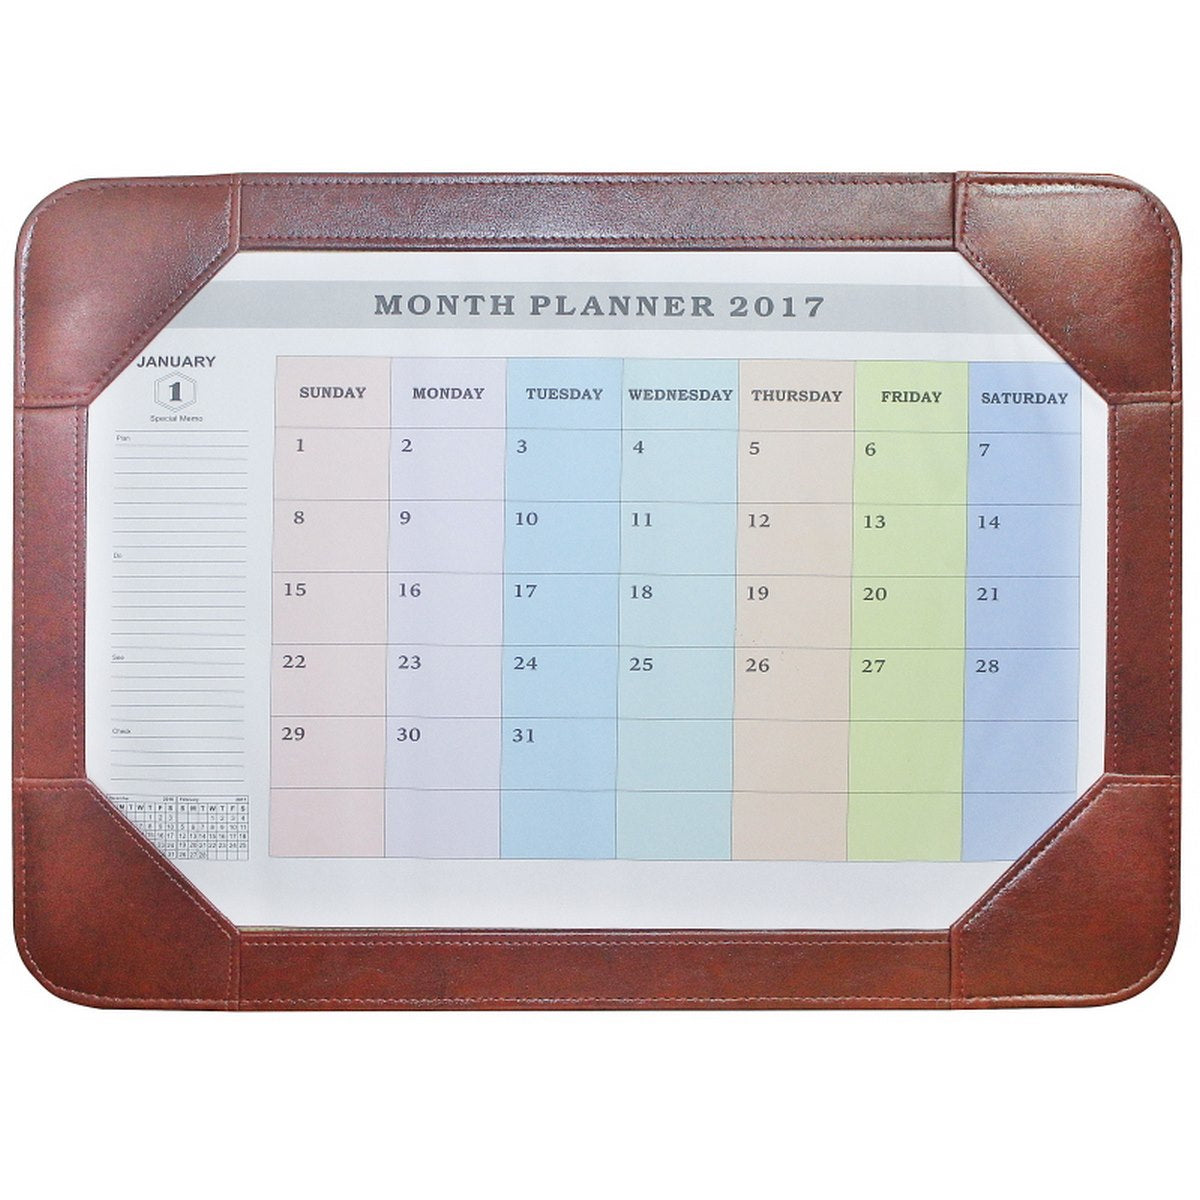 Brown Table Monthly Planner - For Shops, Schools, Corporates, Office Use JATMPB01/S00